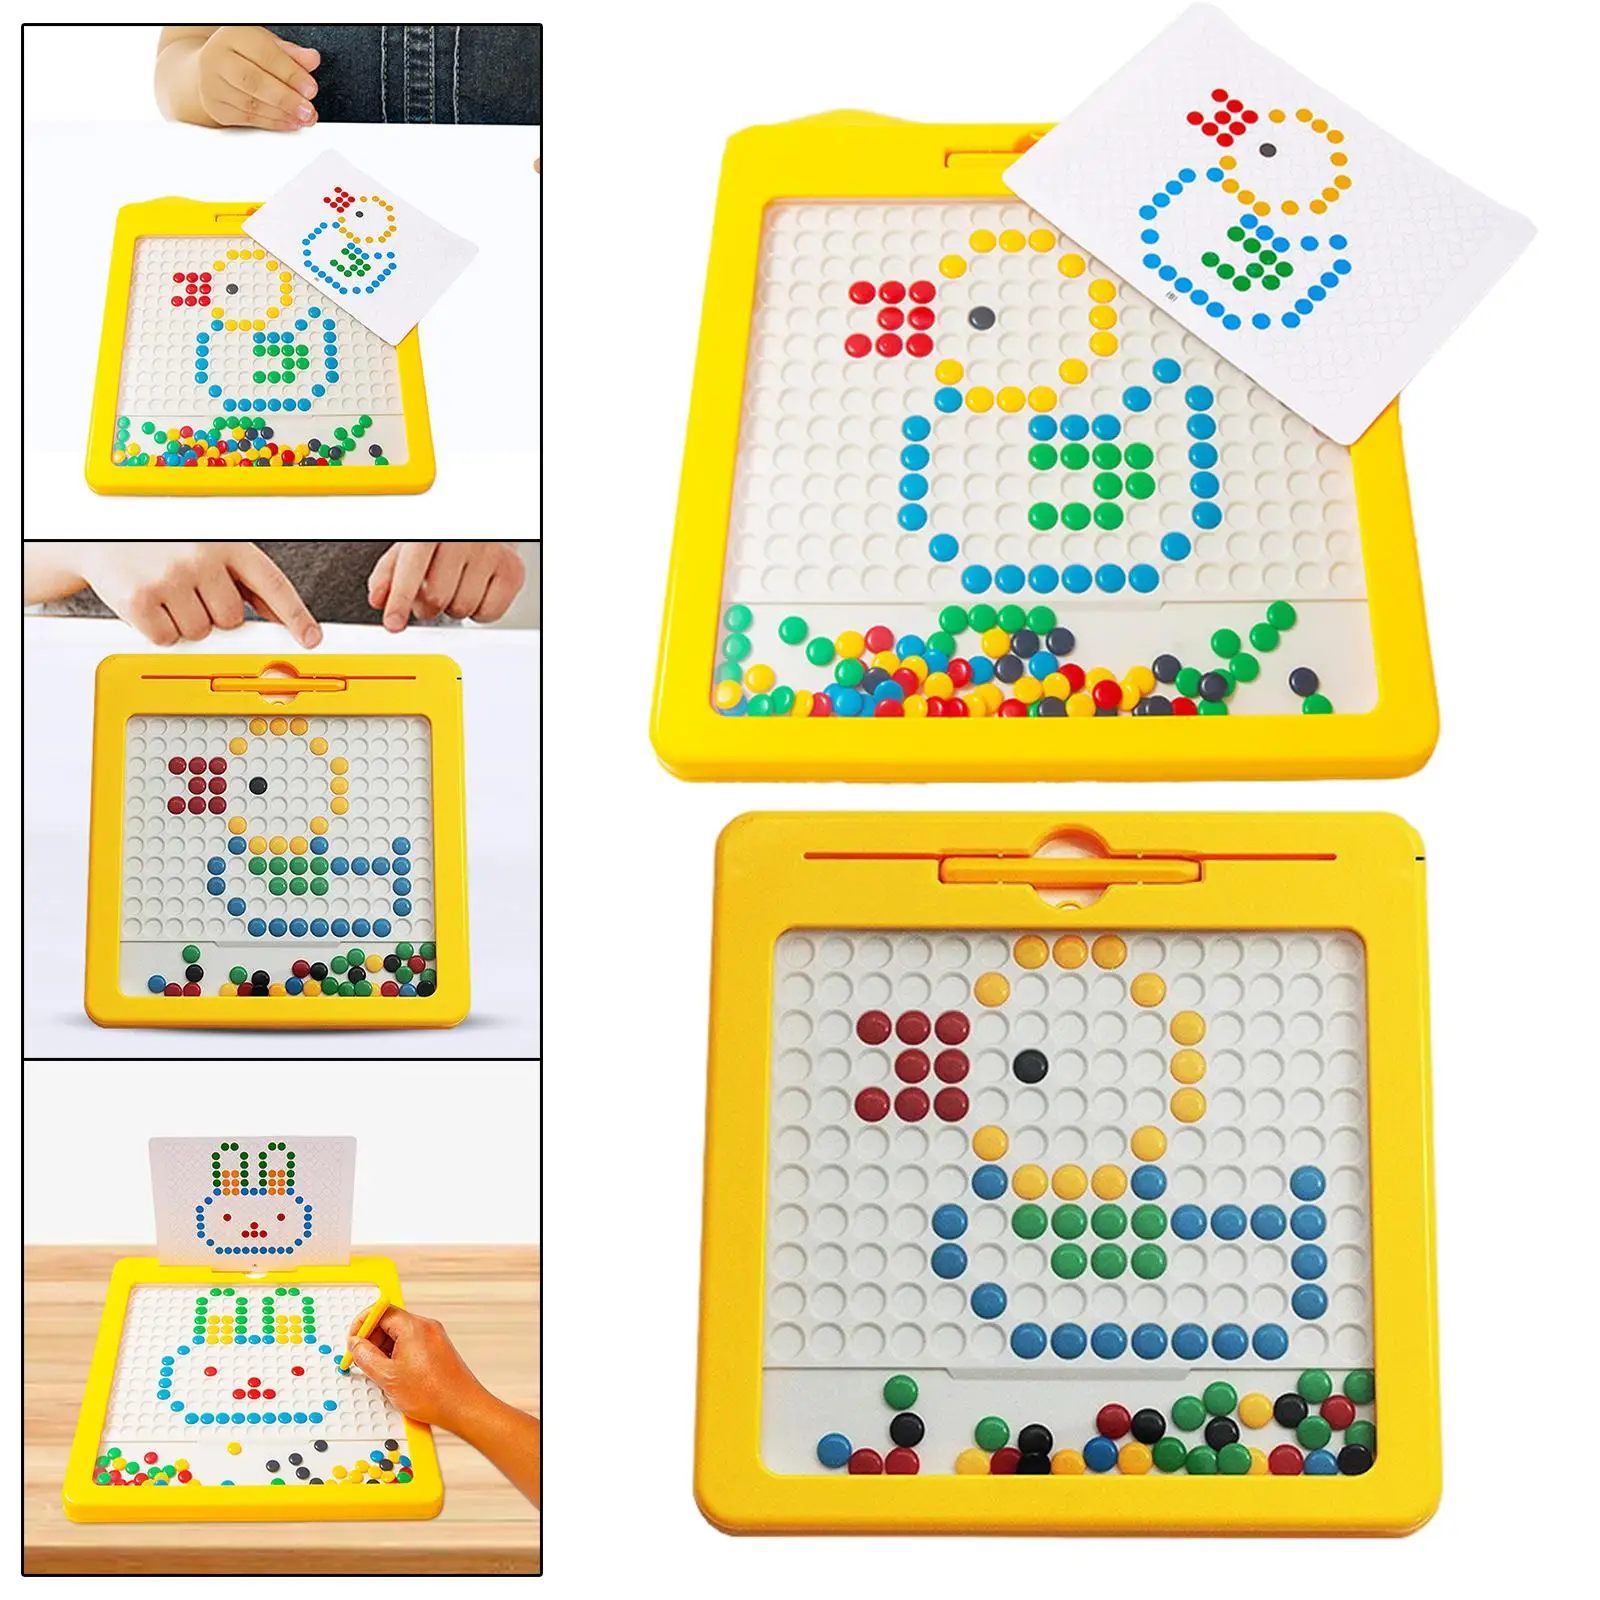 Magnetic Drawing Board with Magnetic Pen, Beads, Cards Educational Montessori Sensory Toys Drawing Pad for Toddlers Kids